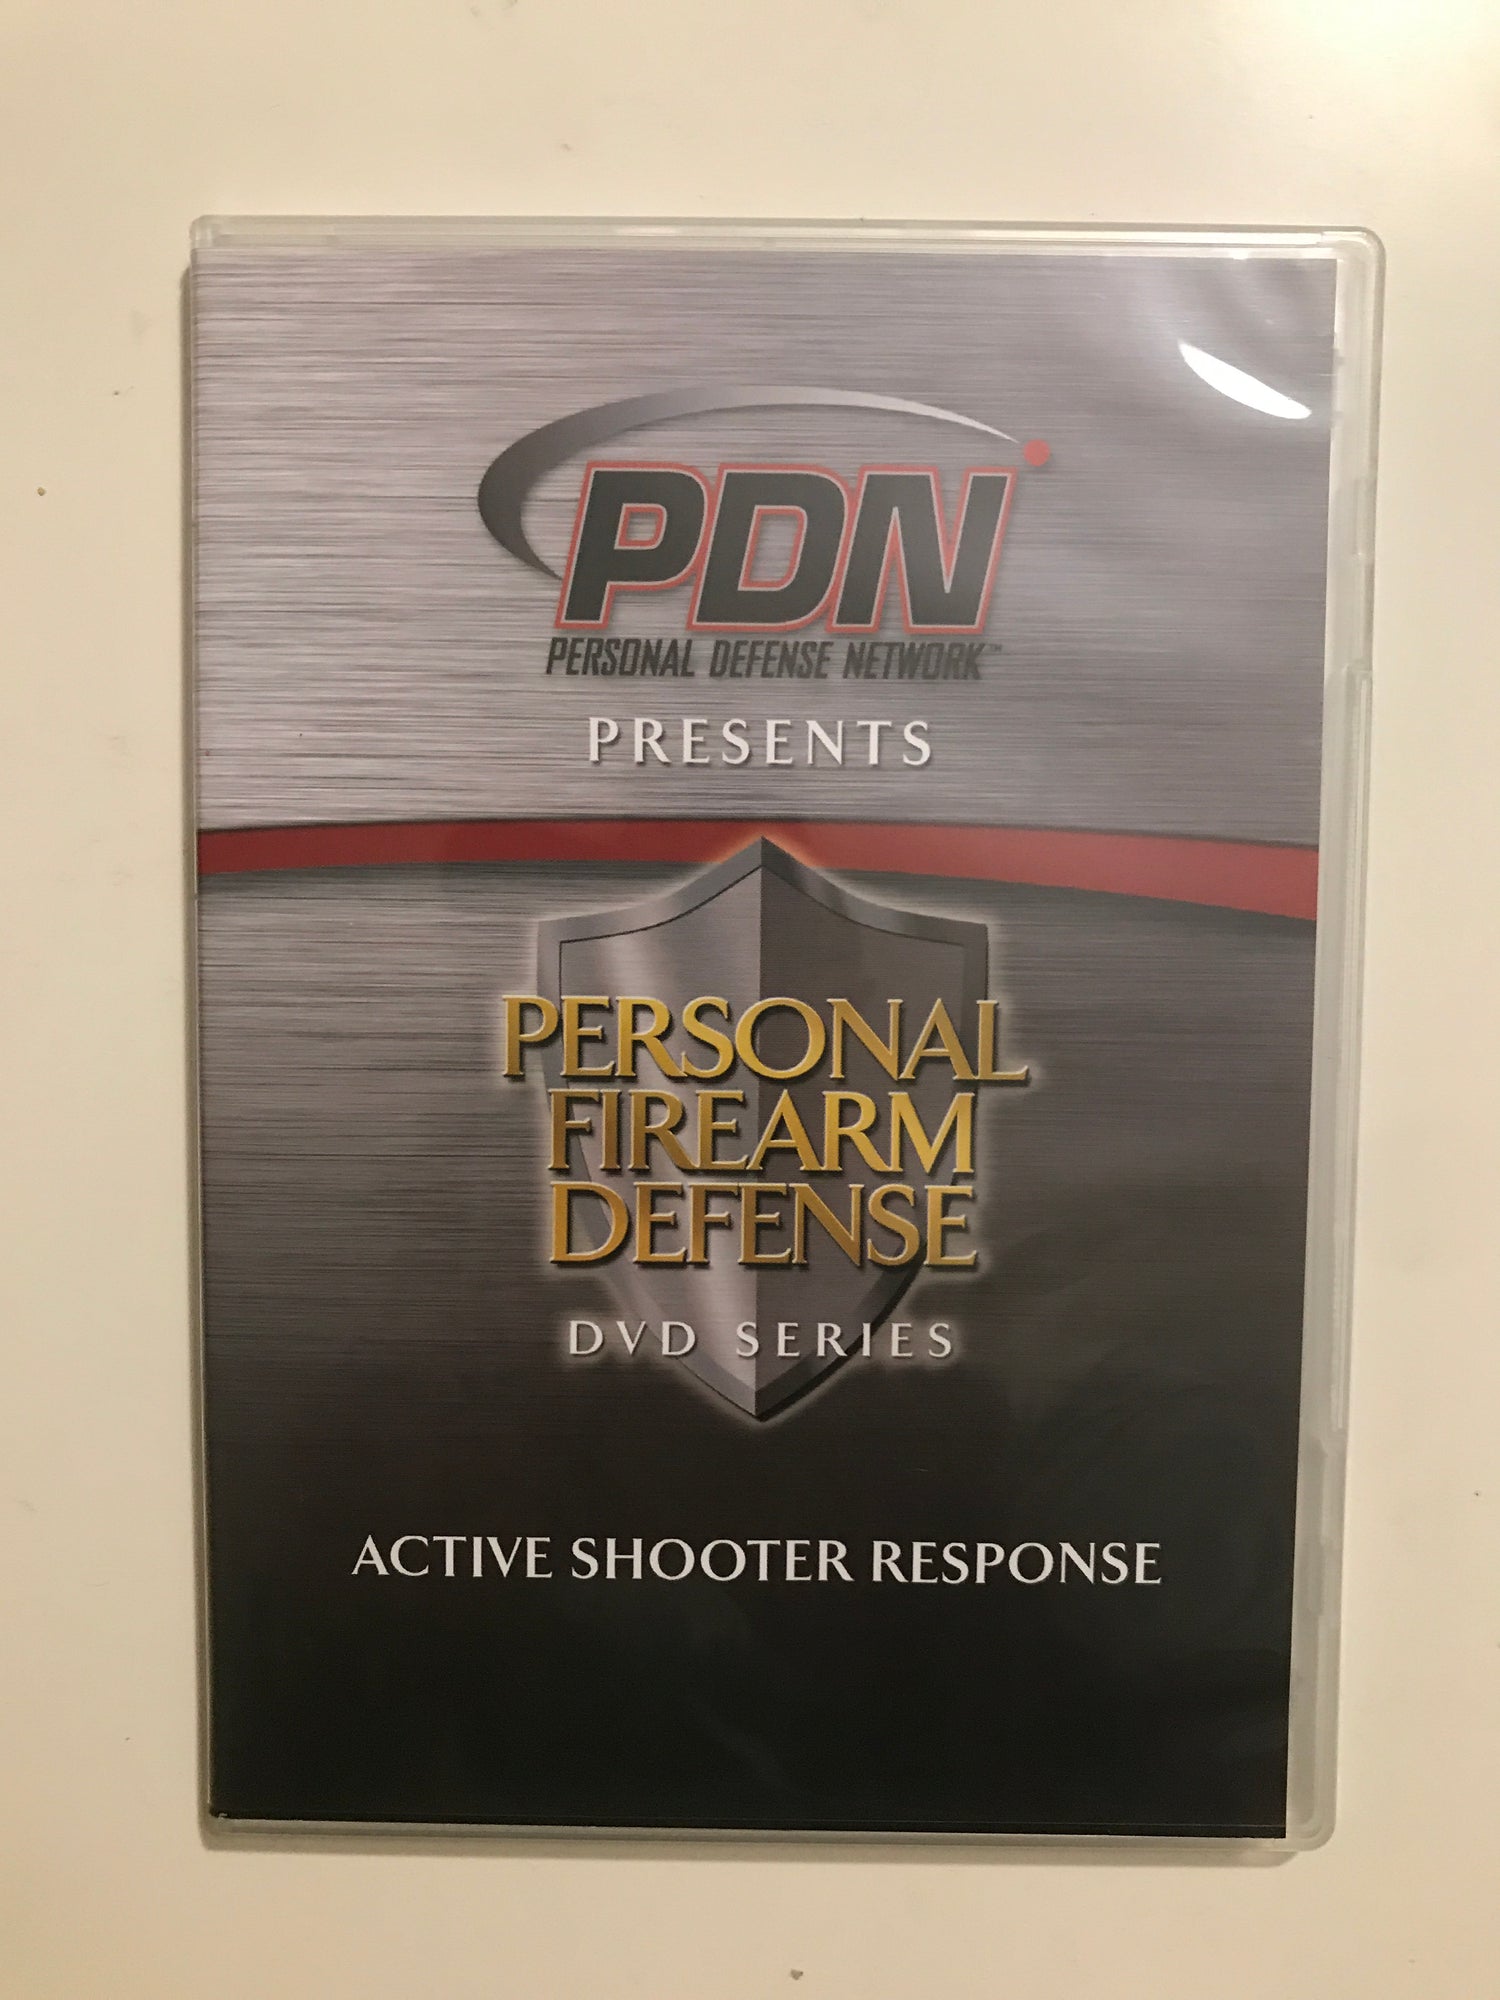 Personal Firearm Defense: Active Shooter Response DVD by Rob Pincus (Preowned) - Budovideos Inc